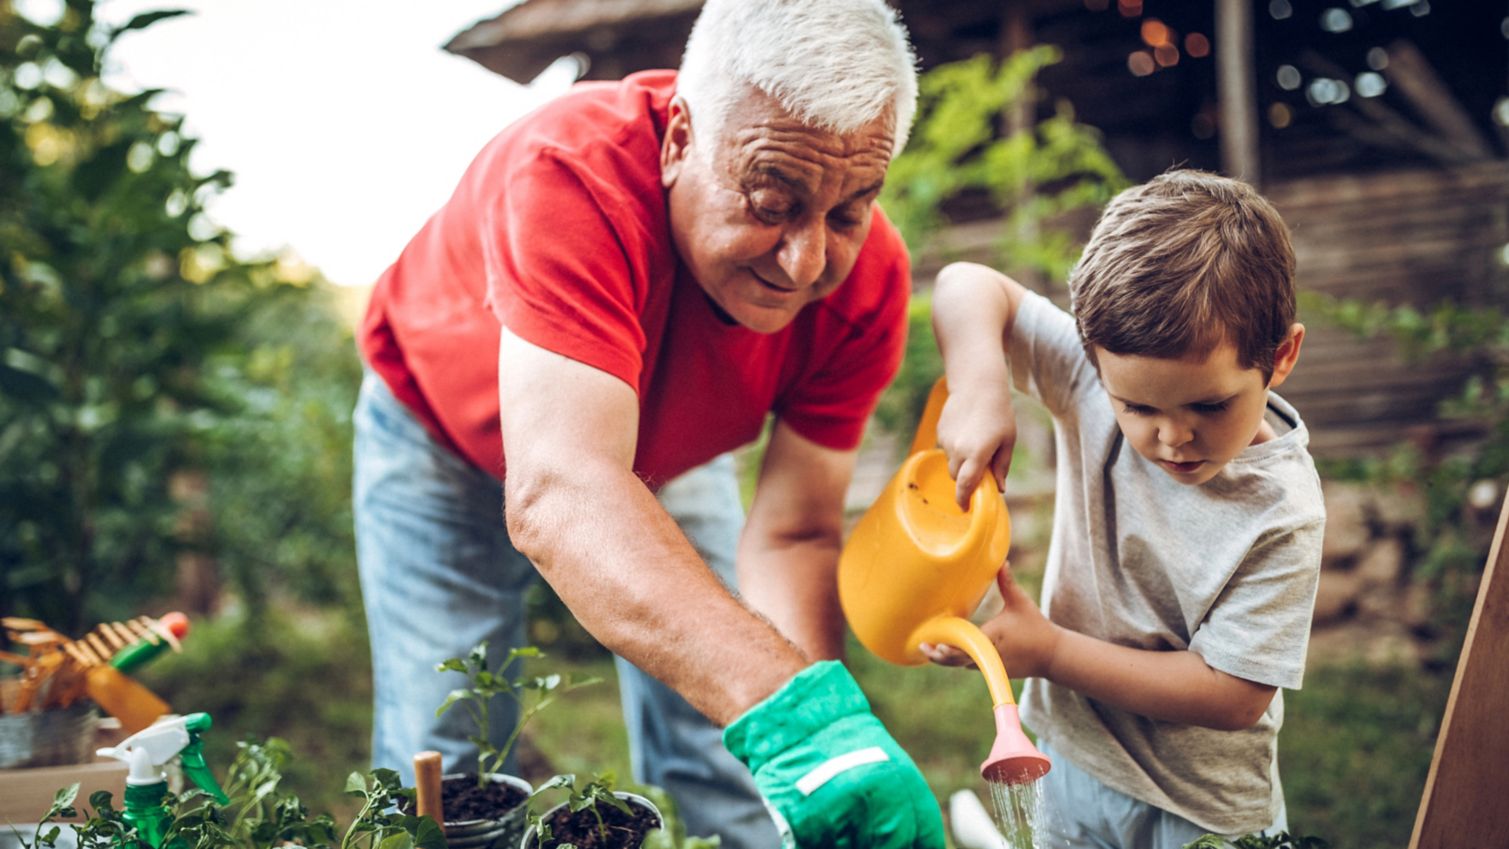 Grandfather works in the garden with his grandson